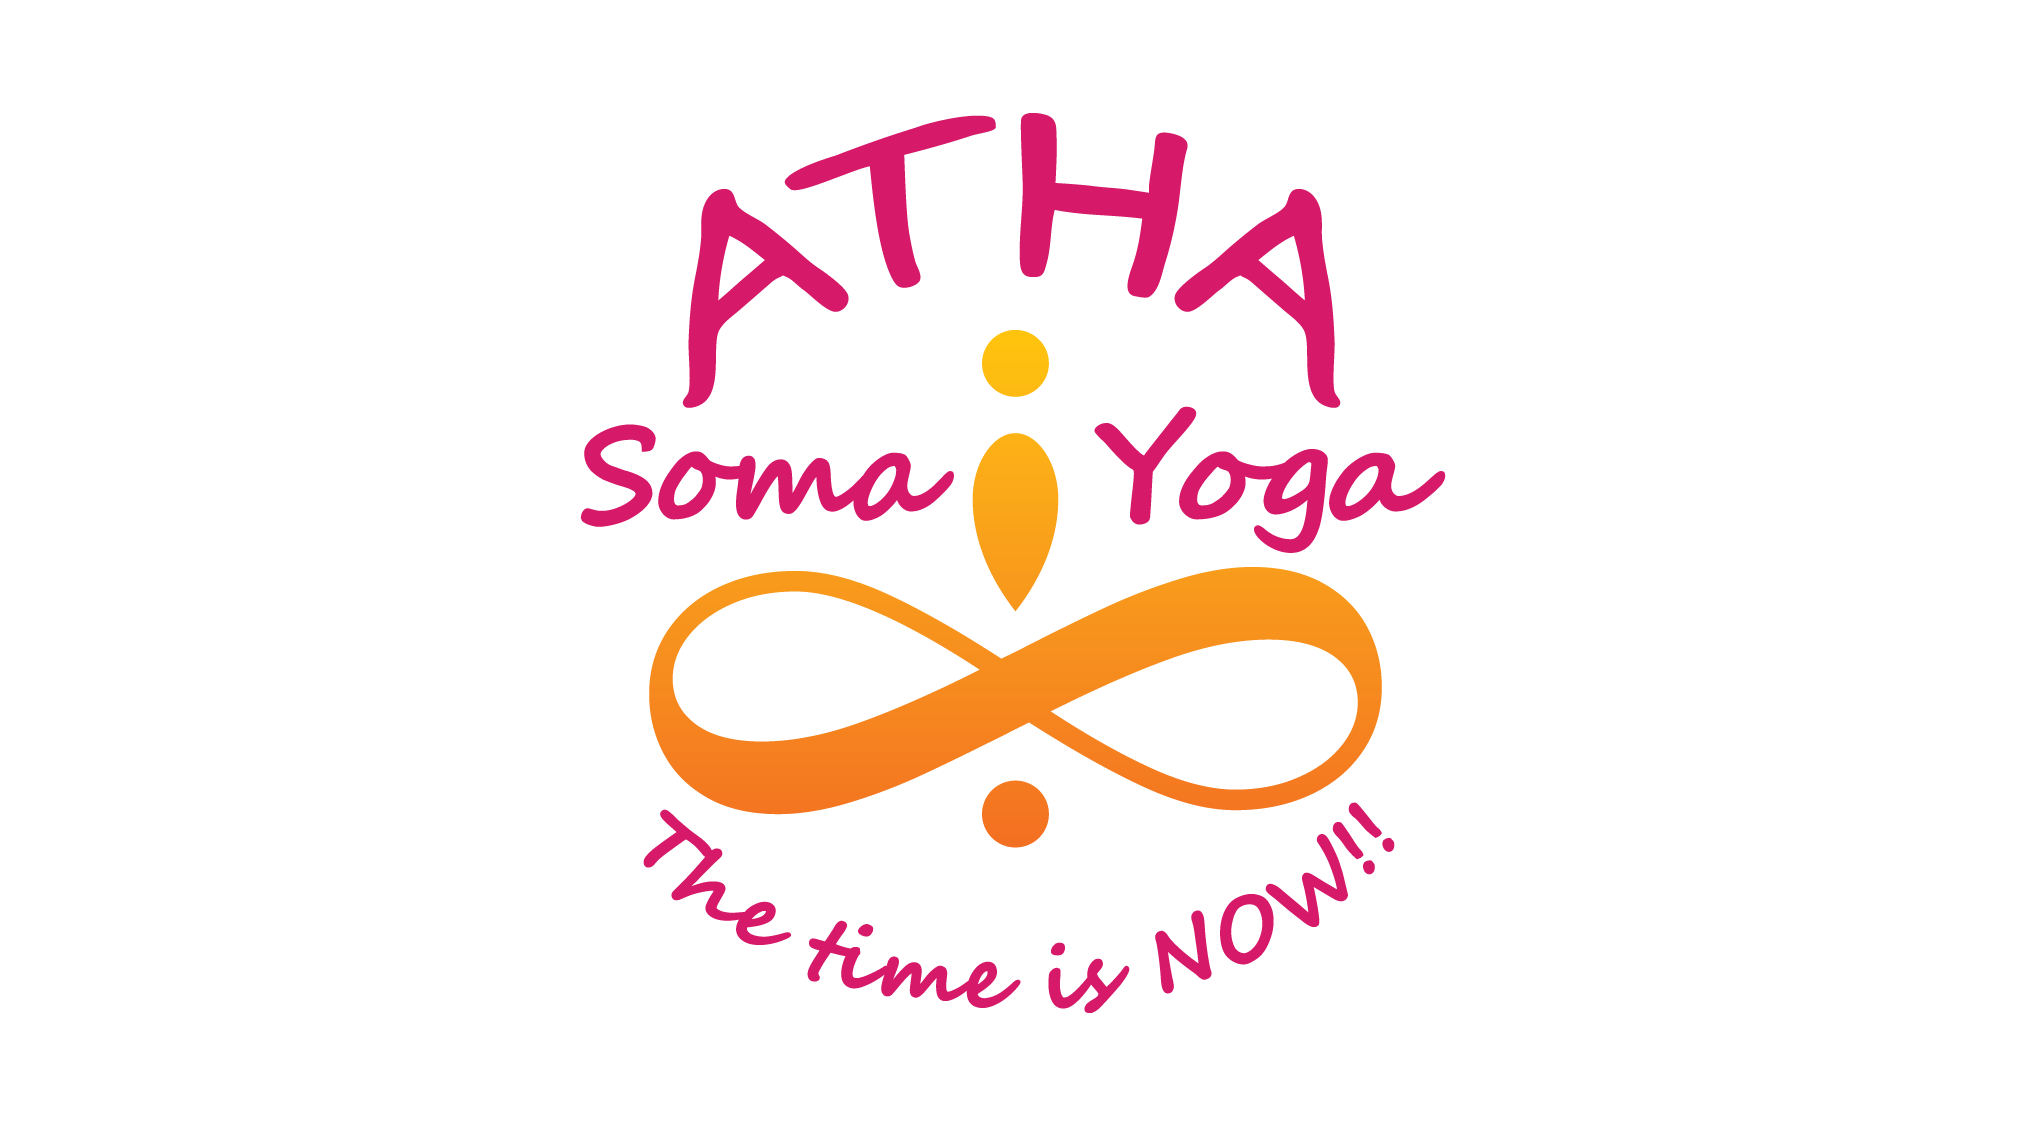 Live a Life of Well-being - Atha SomaYoga